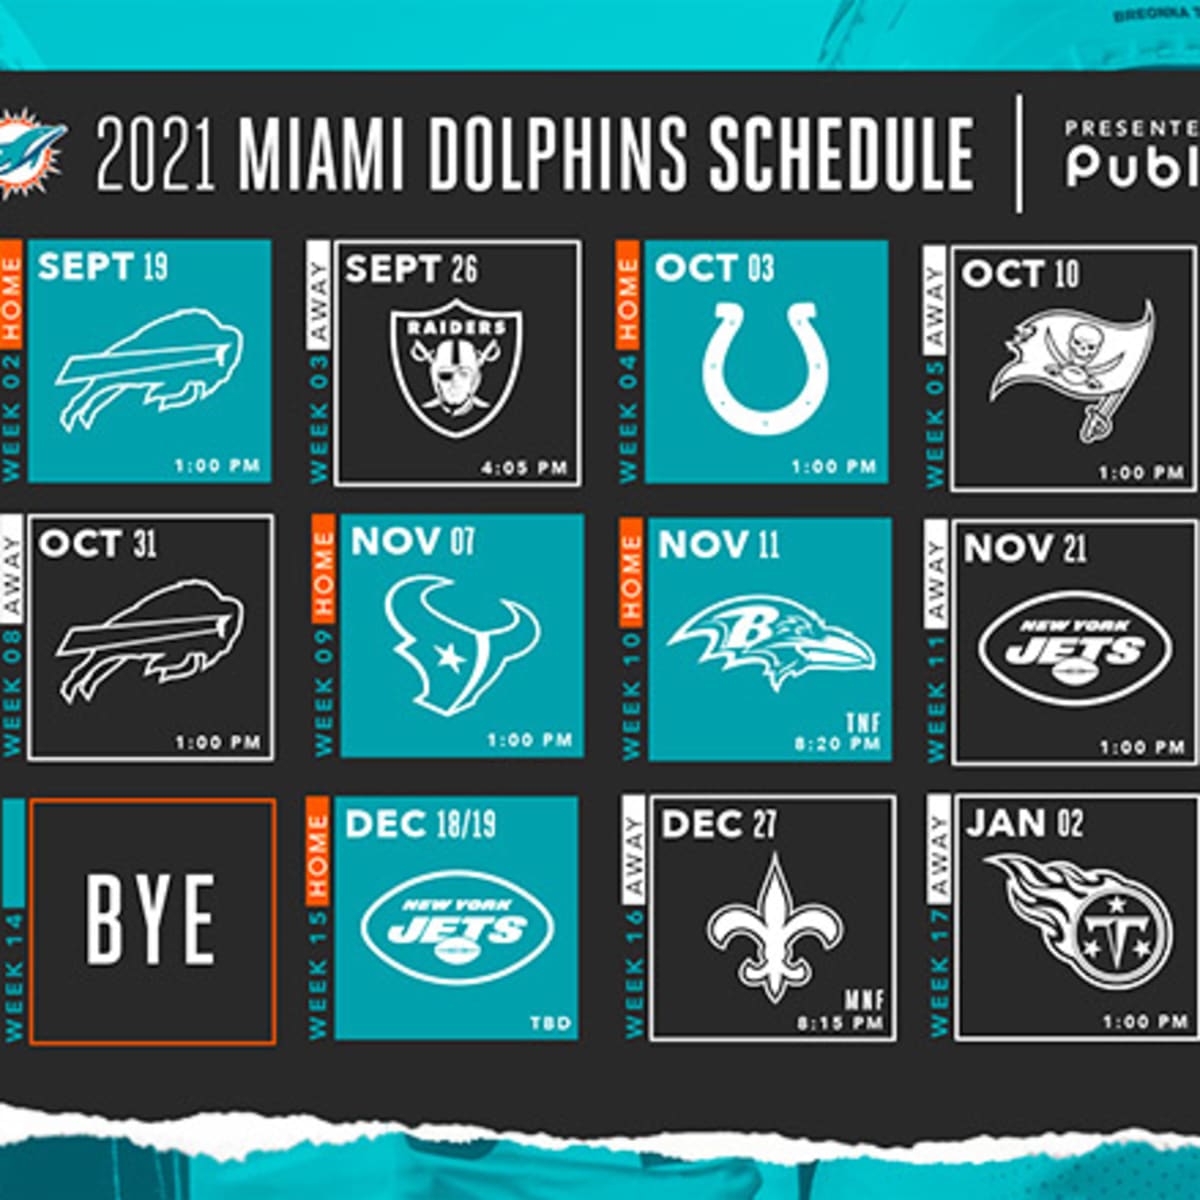 Miami Dolphins Home Schedule 2022 Miami Dolphins Schedule 2021 - Athlonsports.com | Expert Predictions,  Picks, And Previews